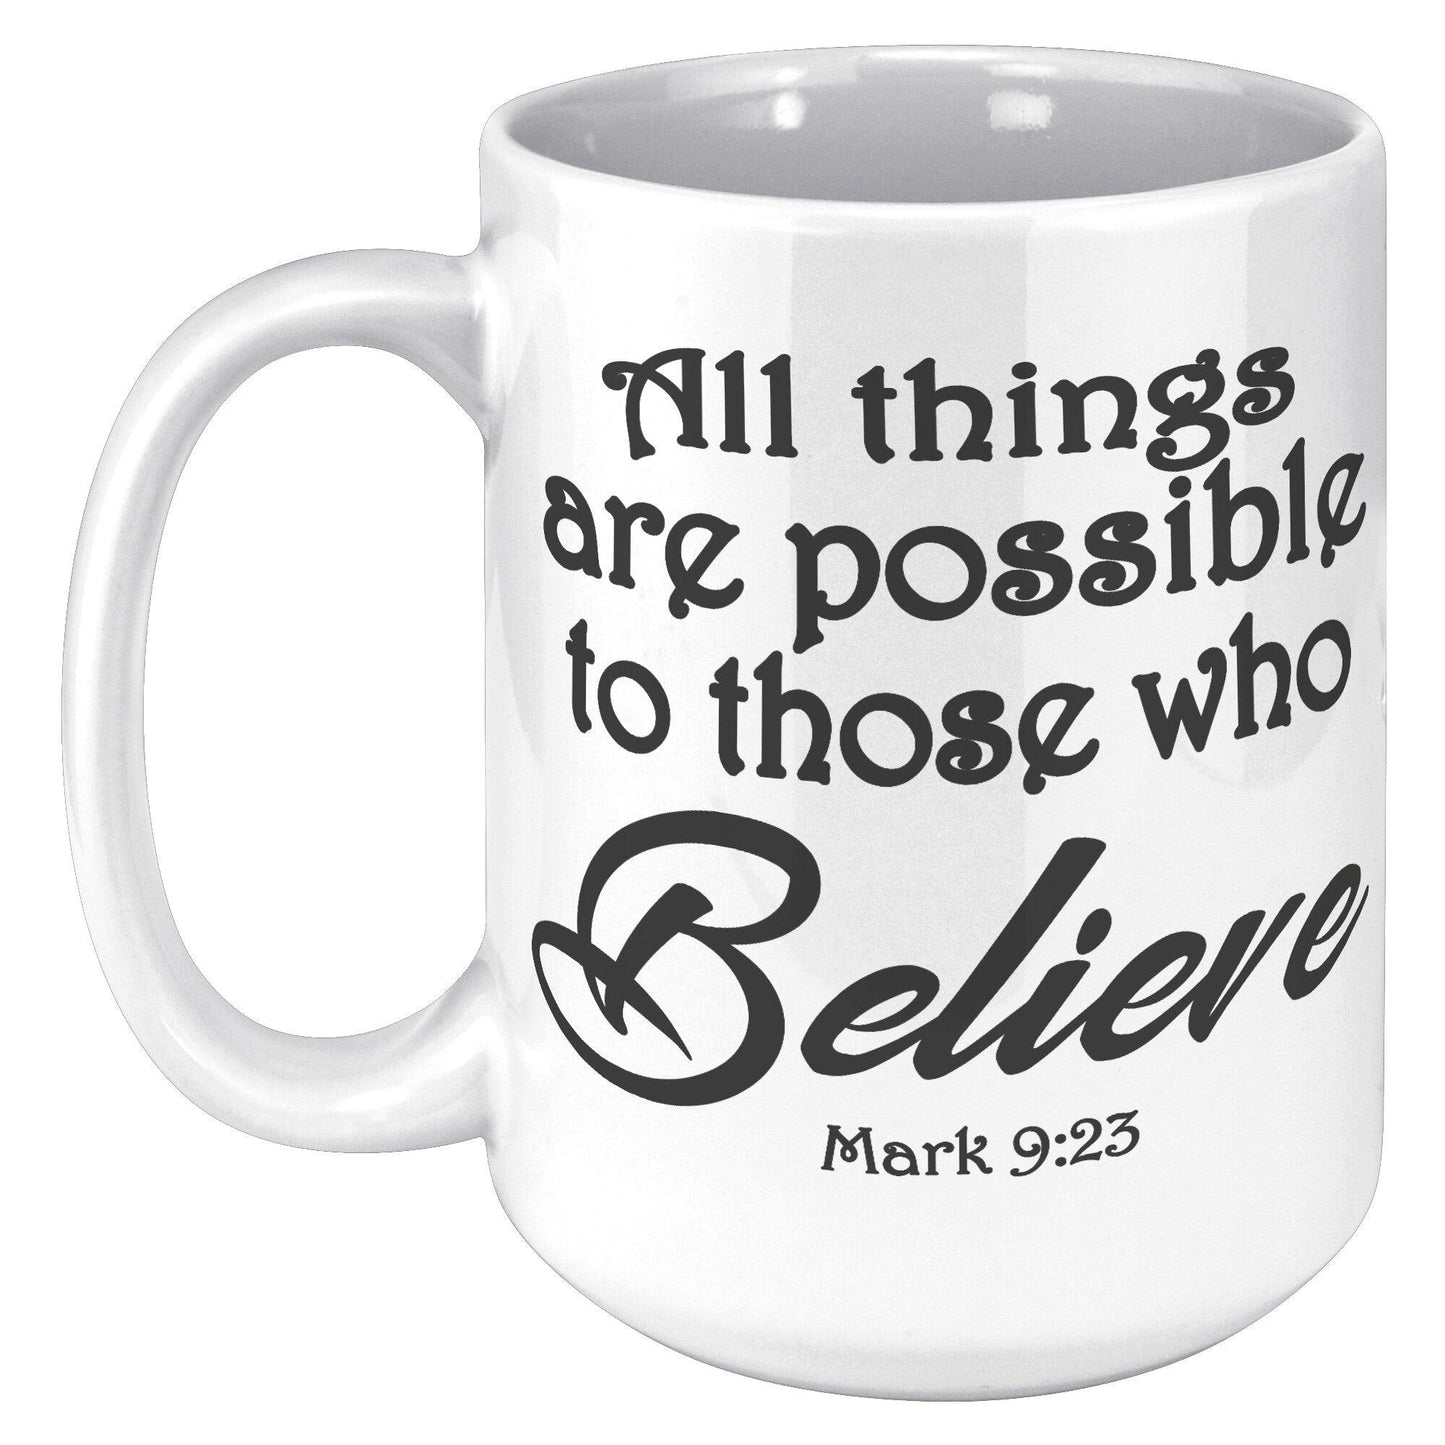 All things are possible to those who believe • Mark 9:23 White Mug - TheGivenGet